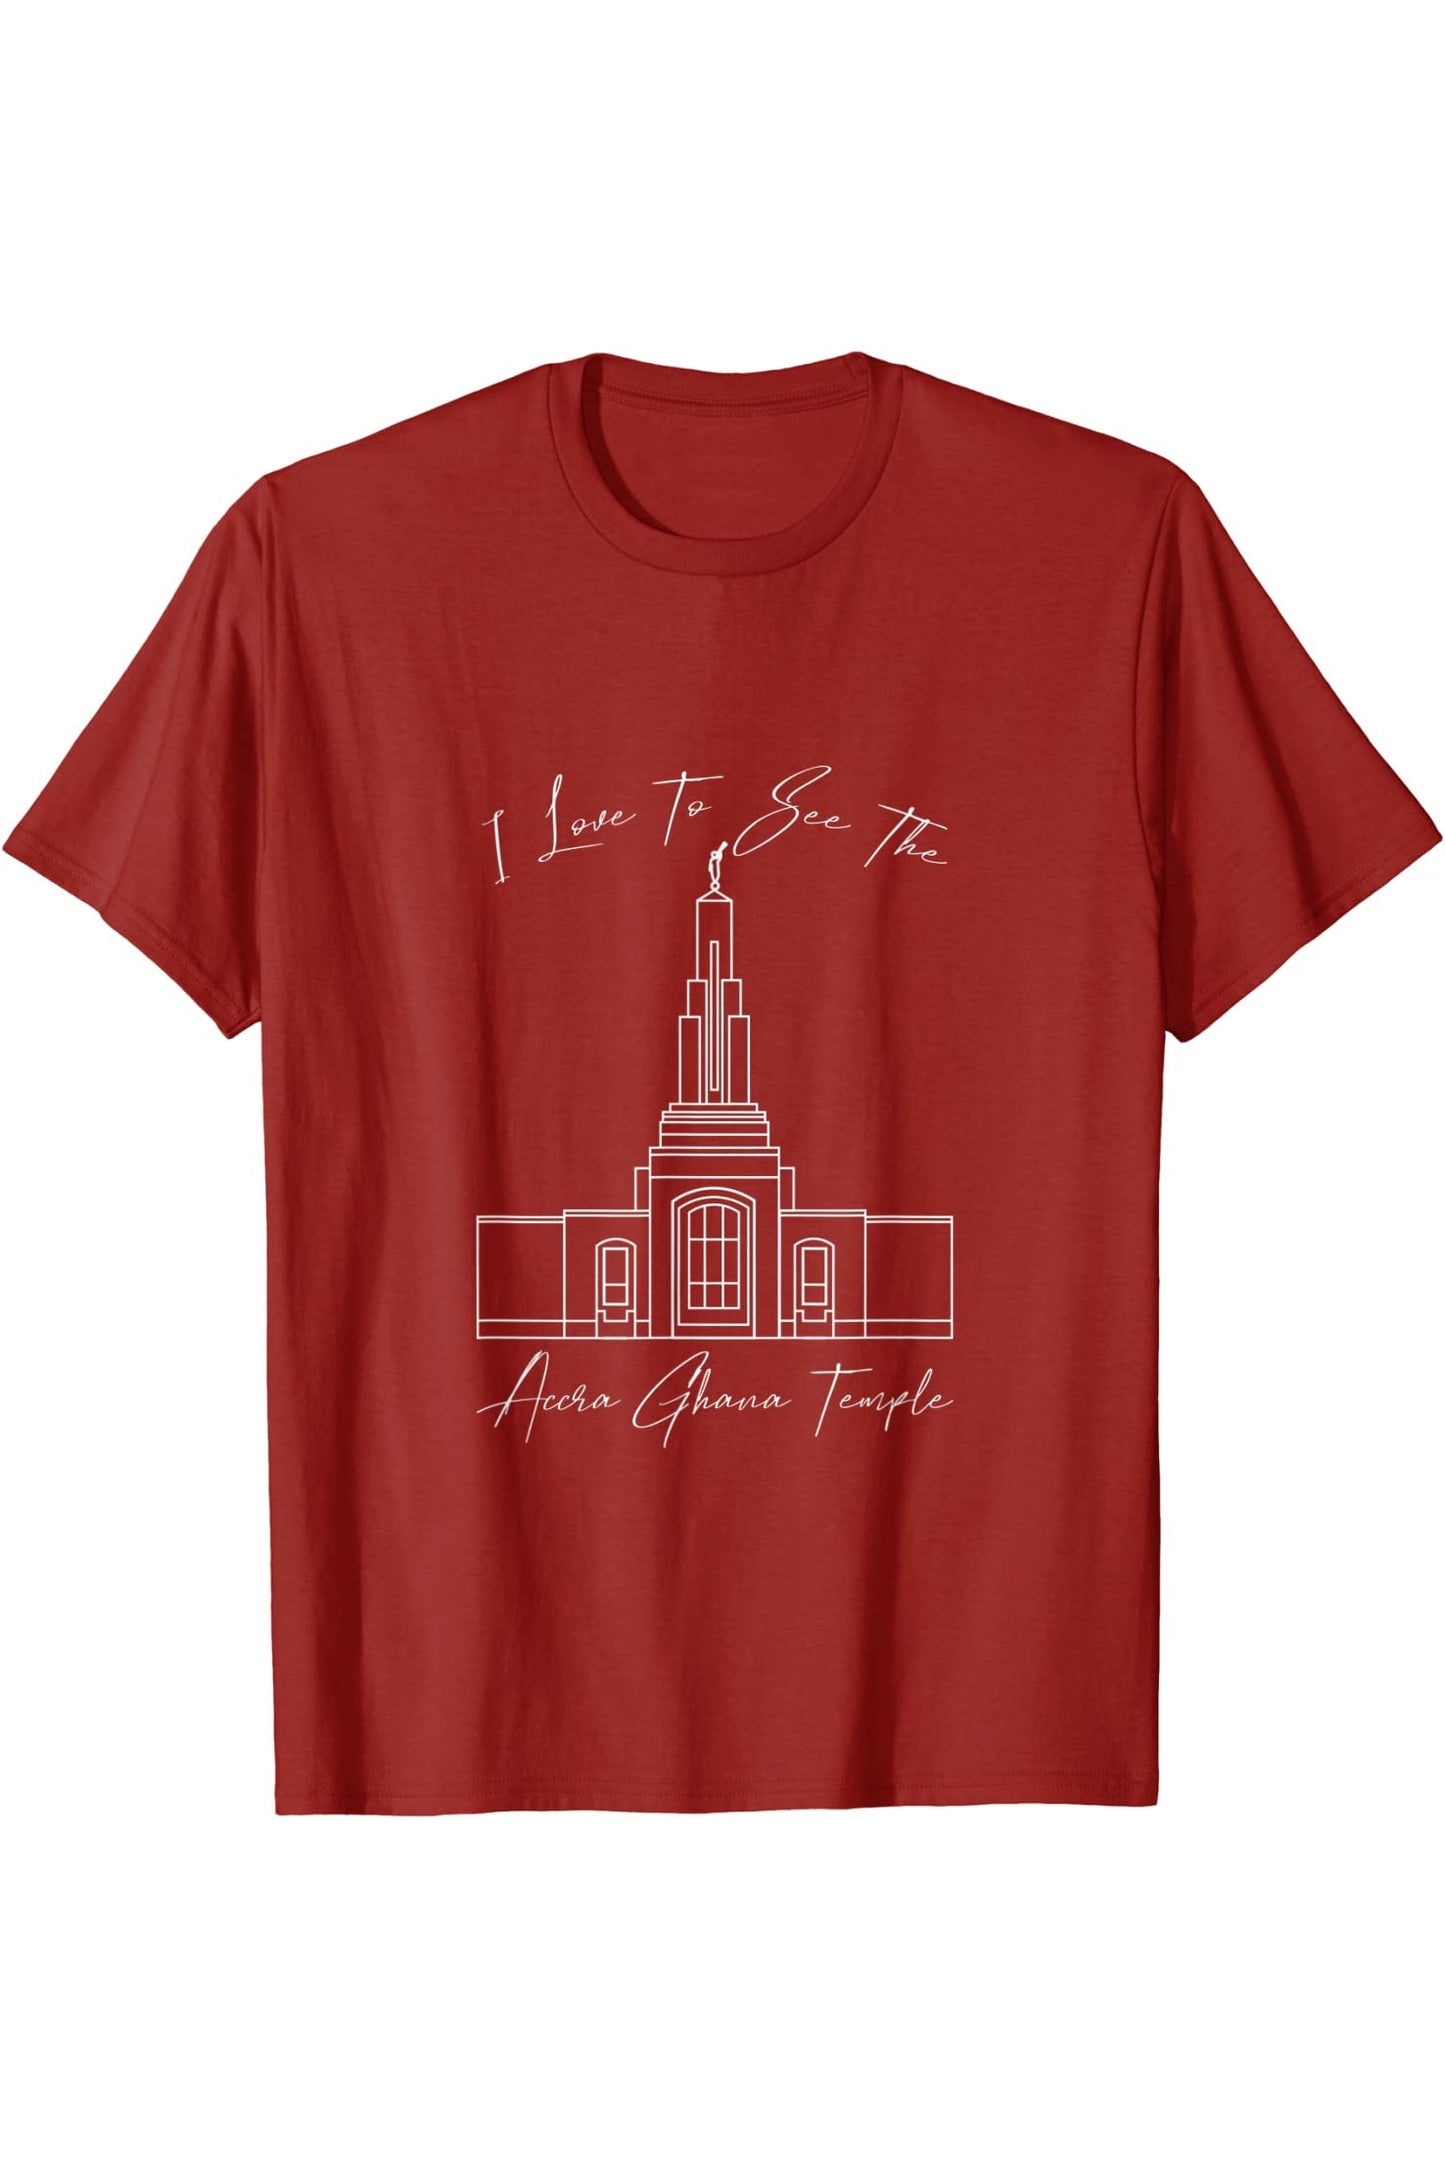 Accra Ghana Temple T-Shirt - Calligraphy Style (English) US